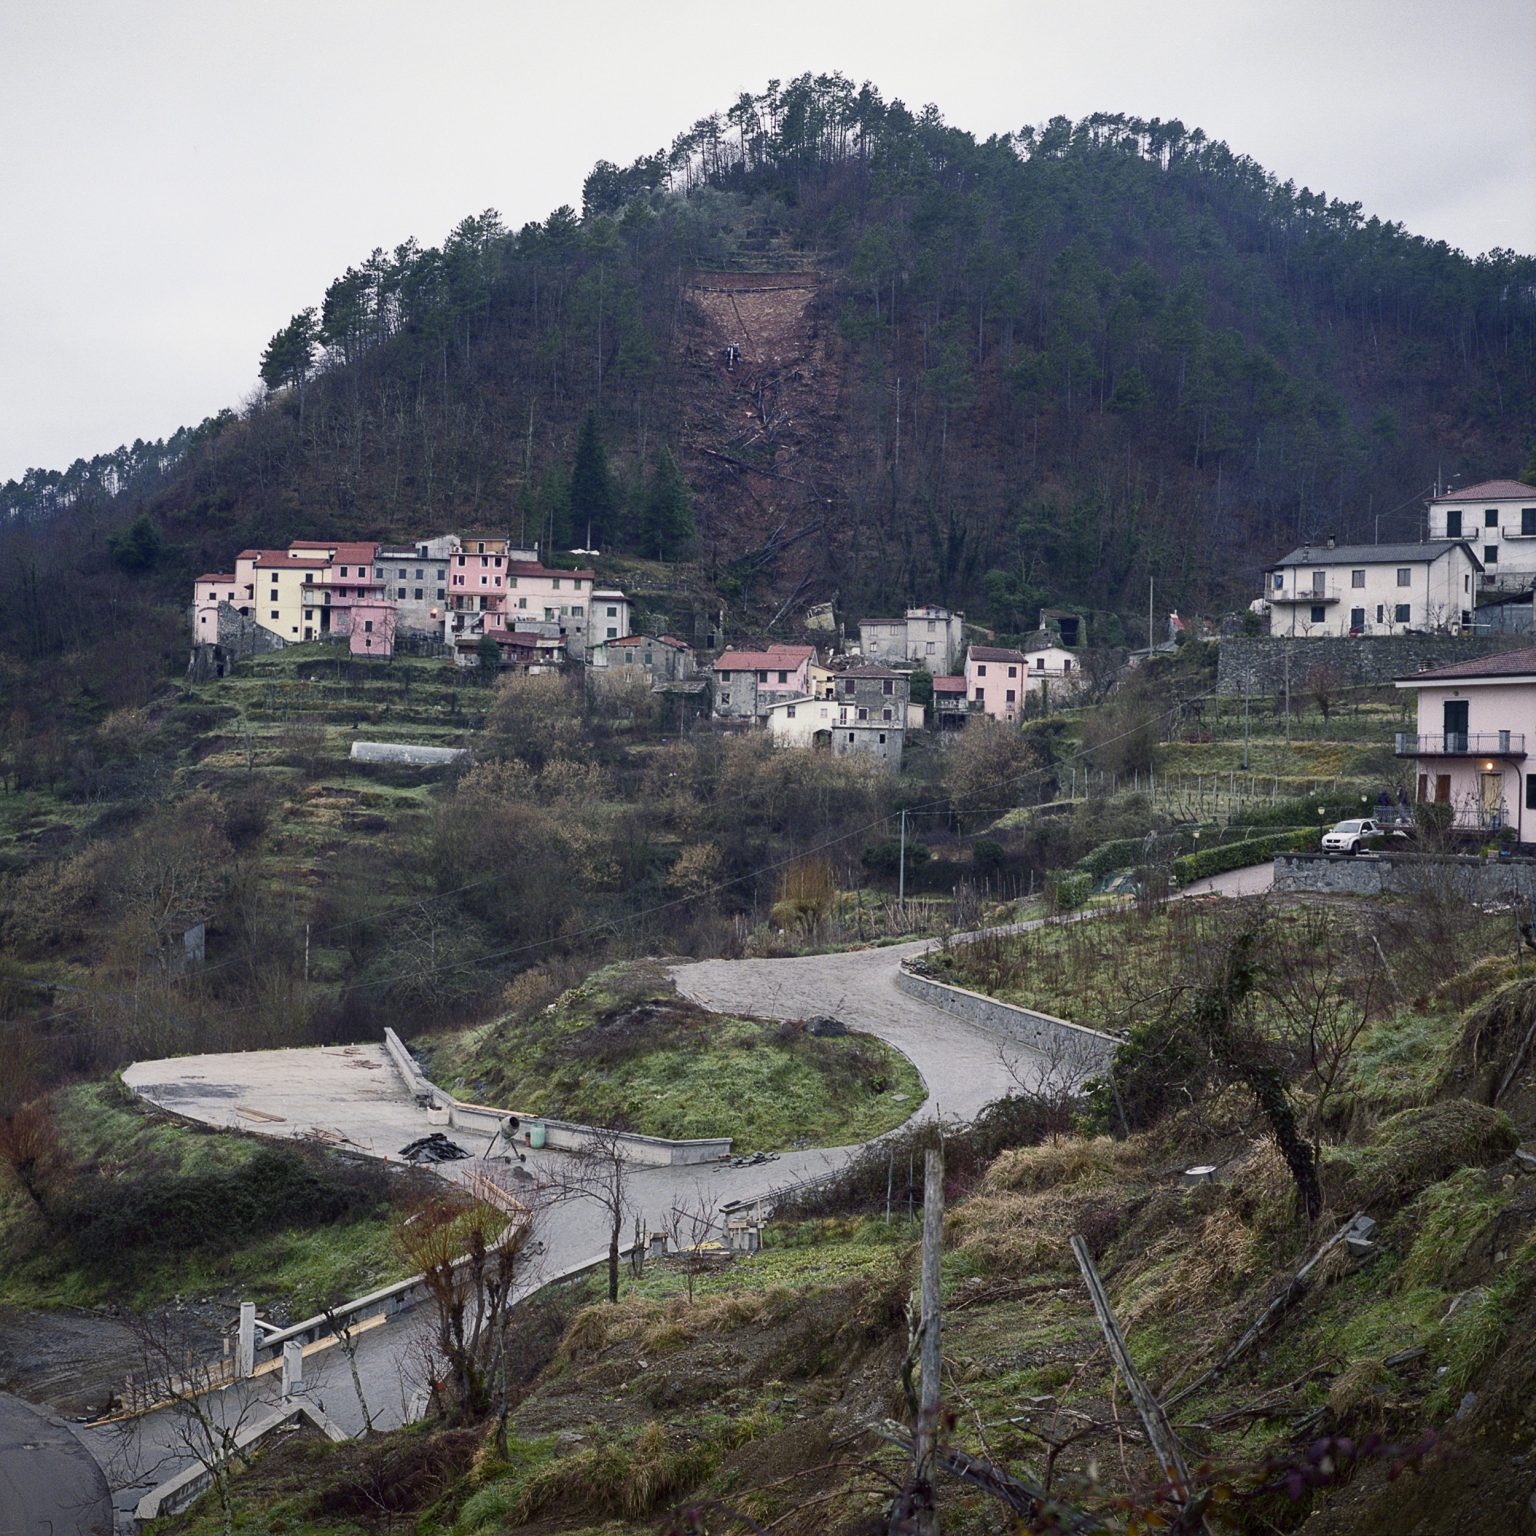 January 2012, Cassana. A view of the town of Cassana, where a landslide destroyed several buildings causing the death of 5 people.